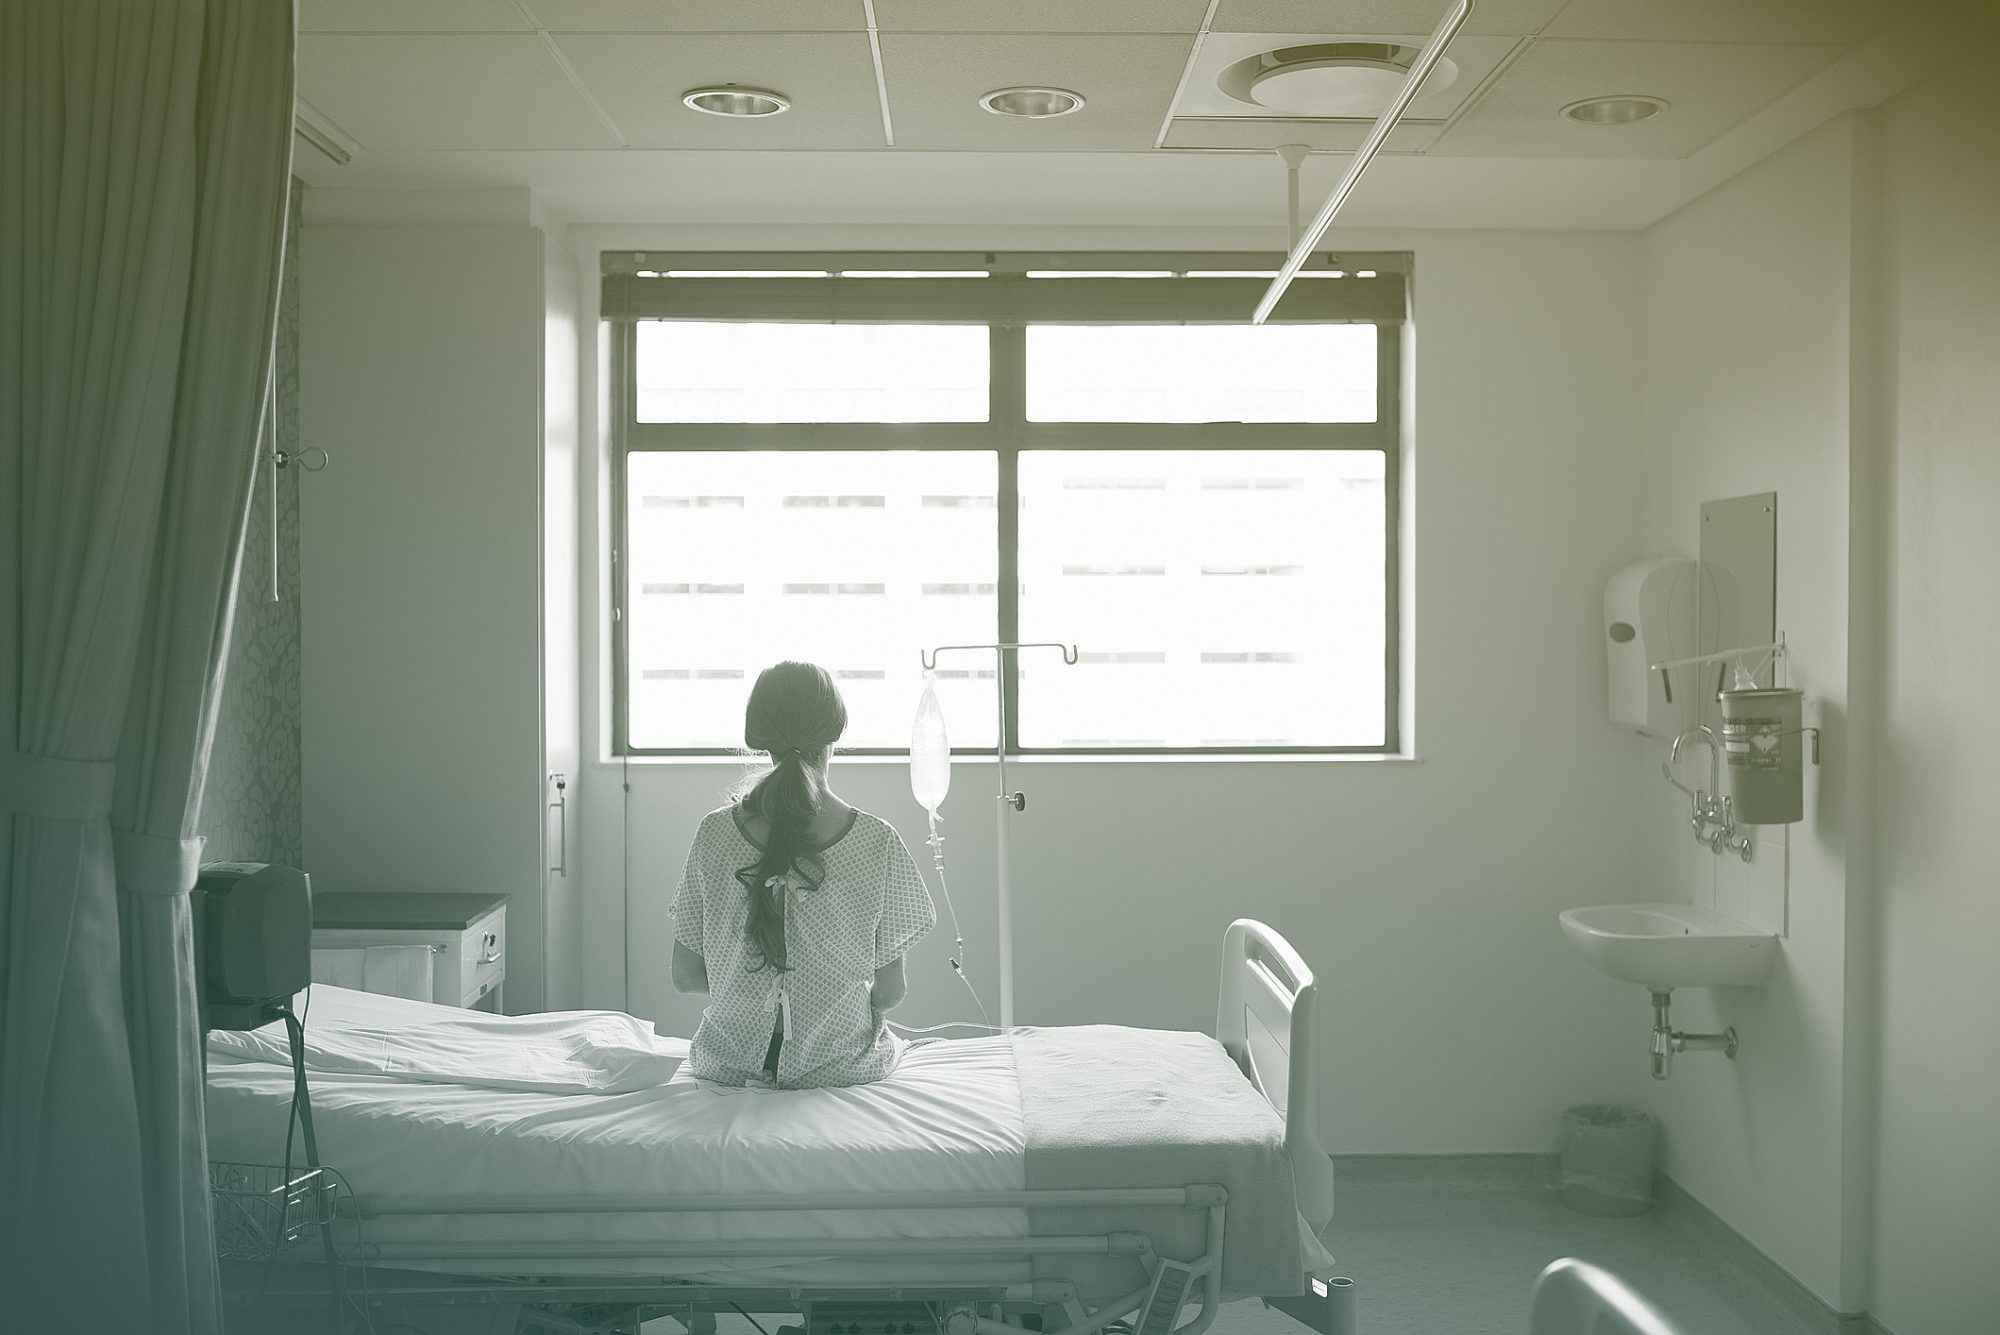 Back view of patient sitting on hospital bed waiting